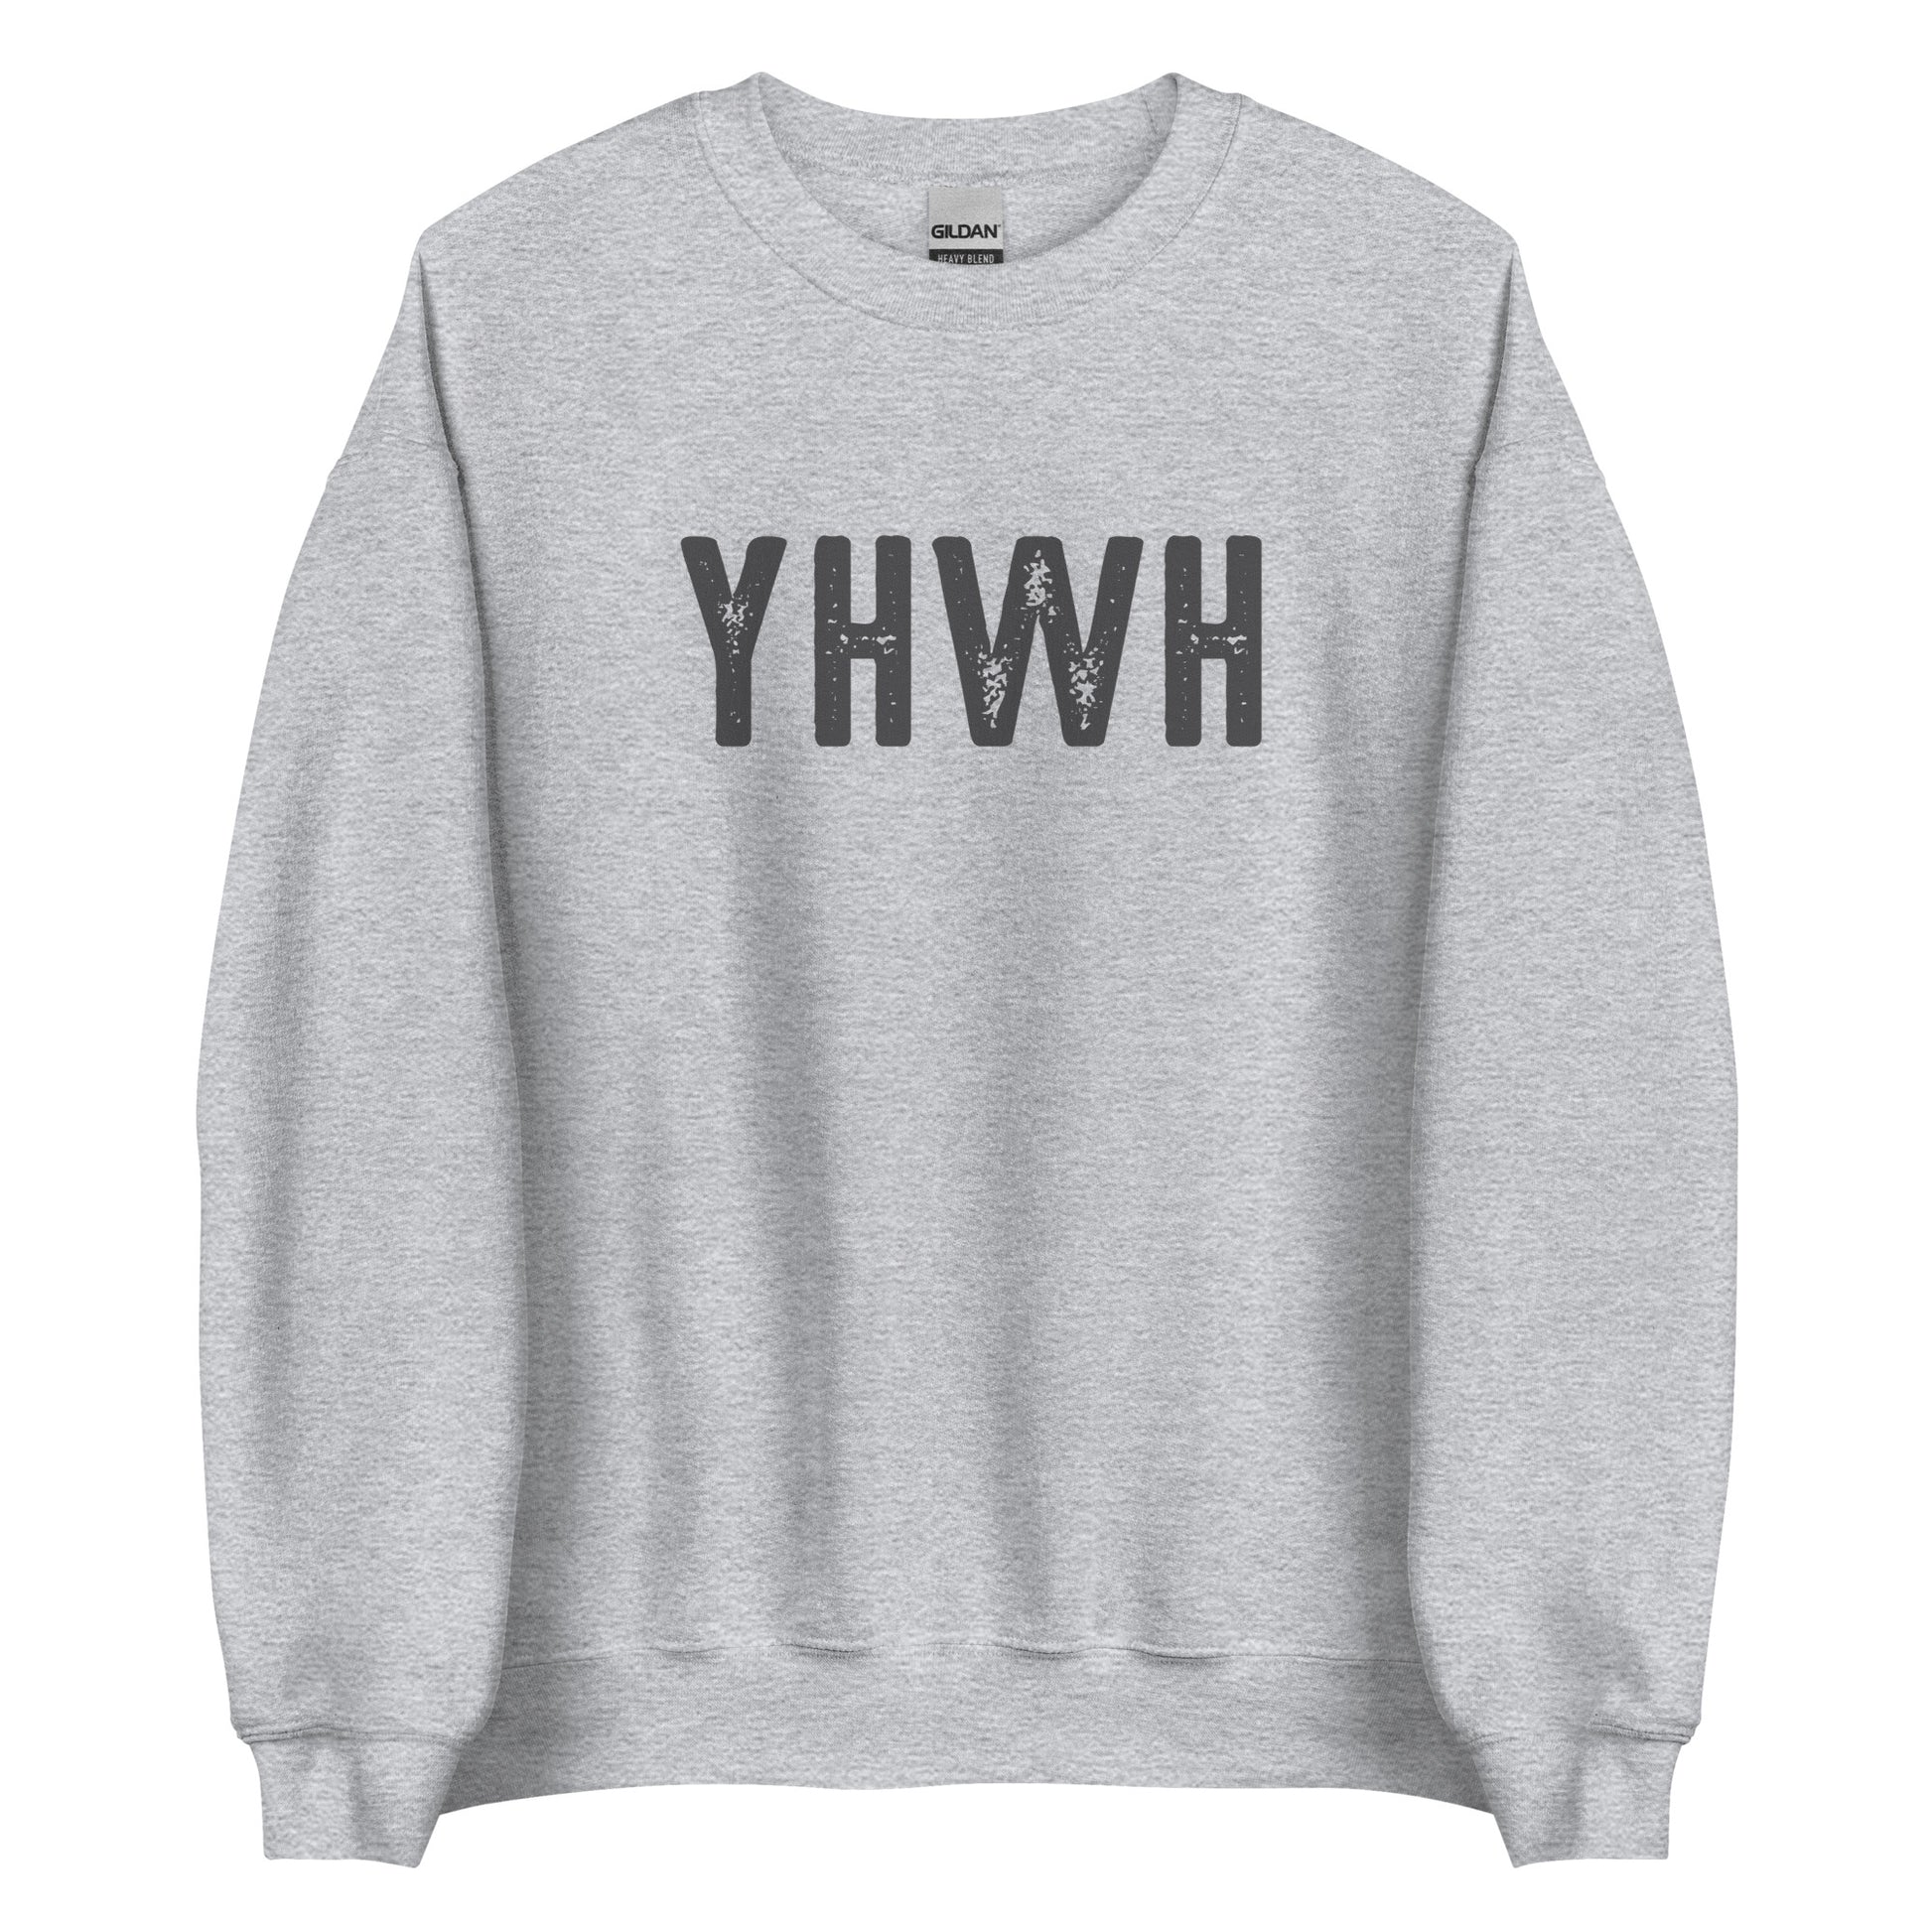 YHWH Hebrew Biblical Name of God Yahweh Christian aesthetic design printed in charcoal on soft heather gray unisex crewneck sweatshirt for men and women